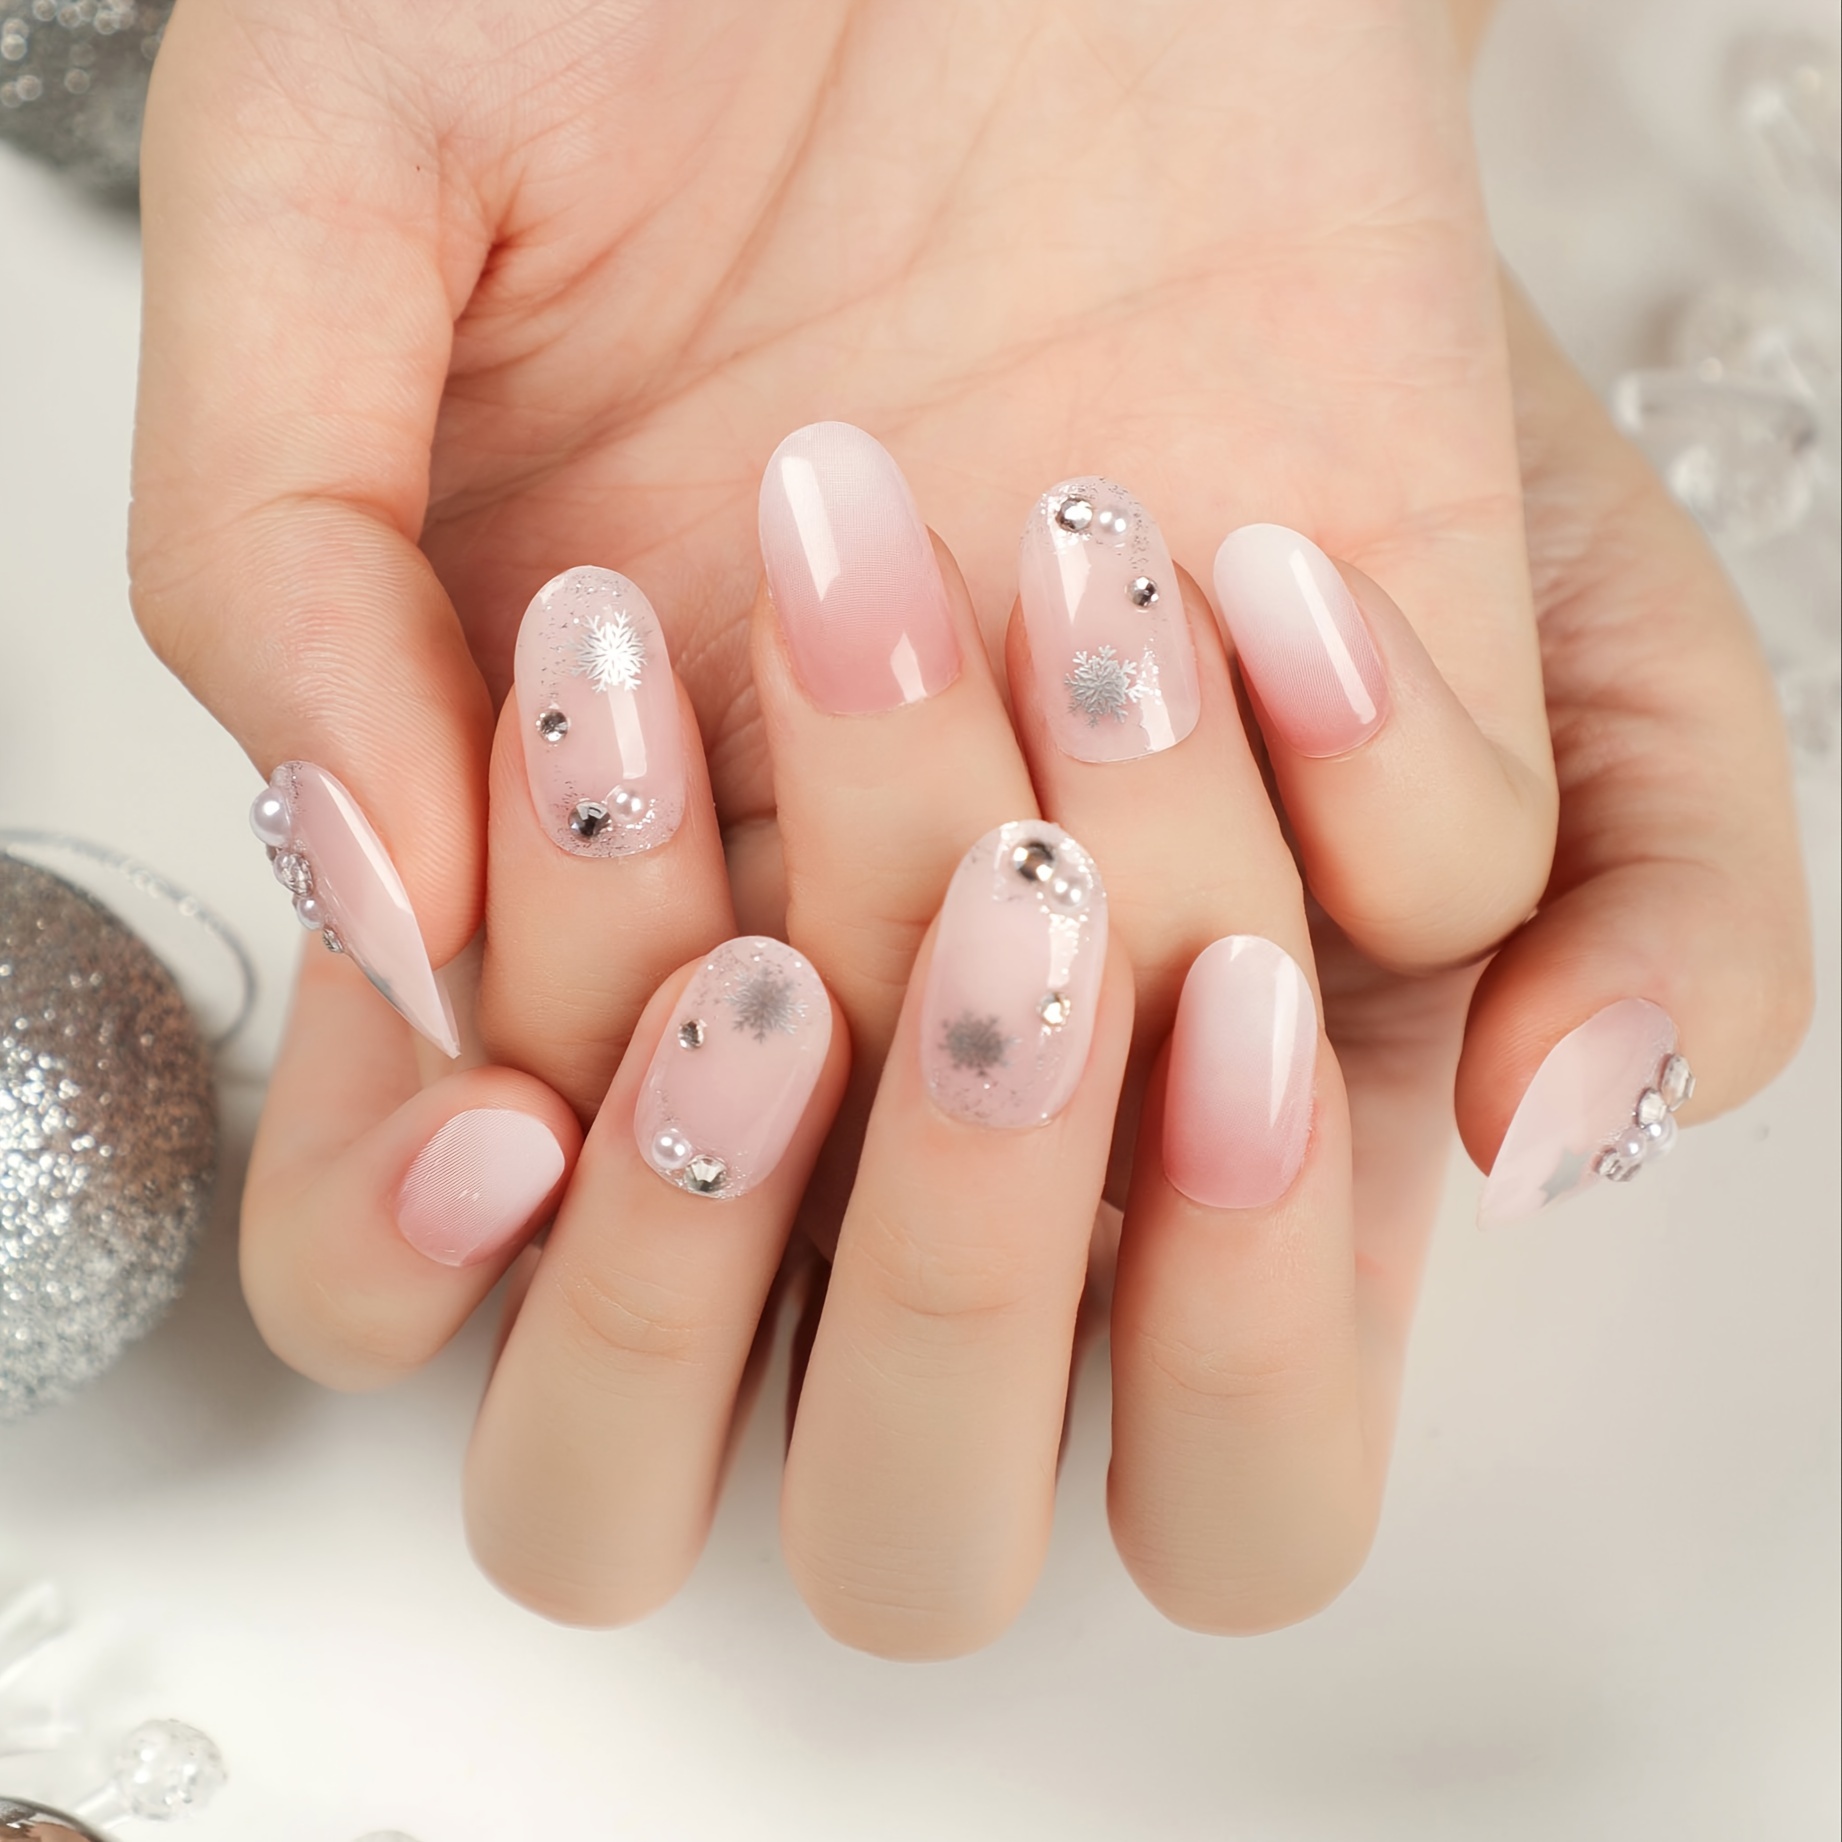  Christmas Square Press on Nails Short Medium Fake Nails Black  Acrylic French Nails with Snowflake Starry Night Full Cover Designs  Artificial Glue on Nails for Women and Girls 24 Pcs 